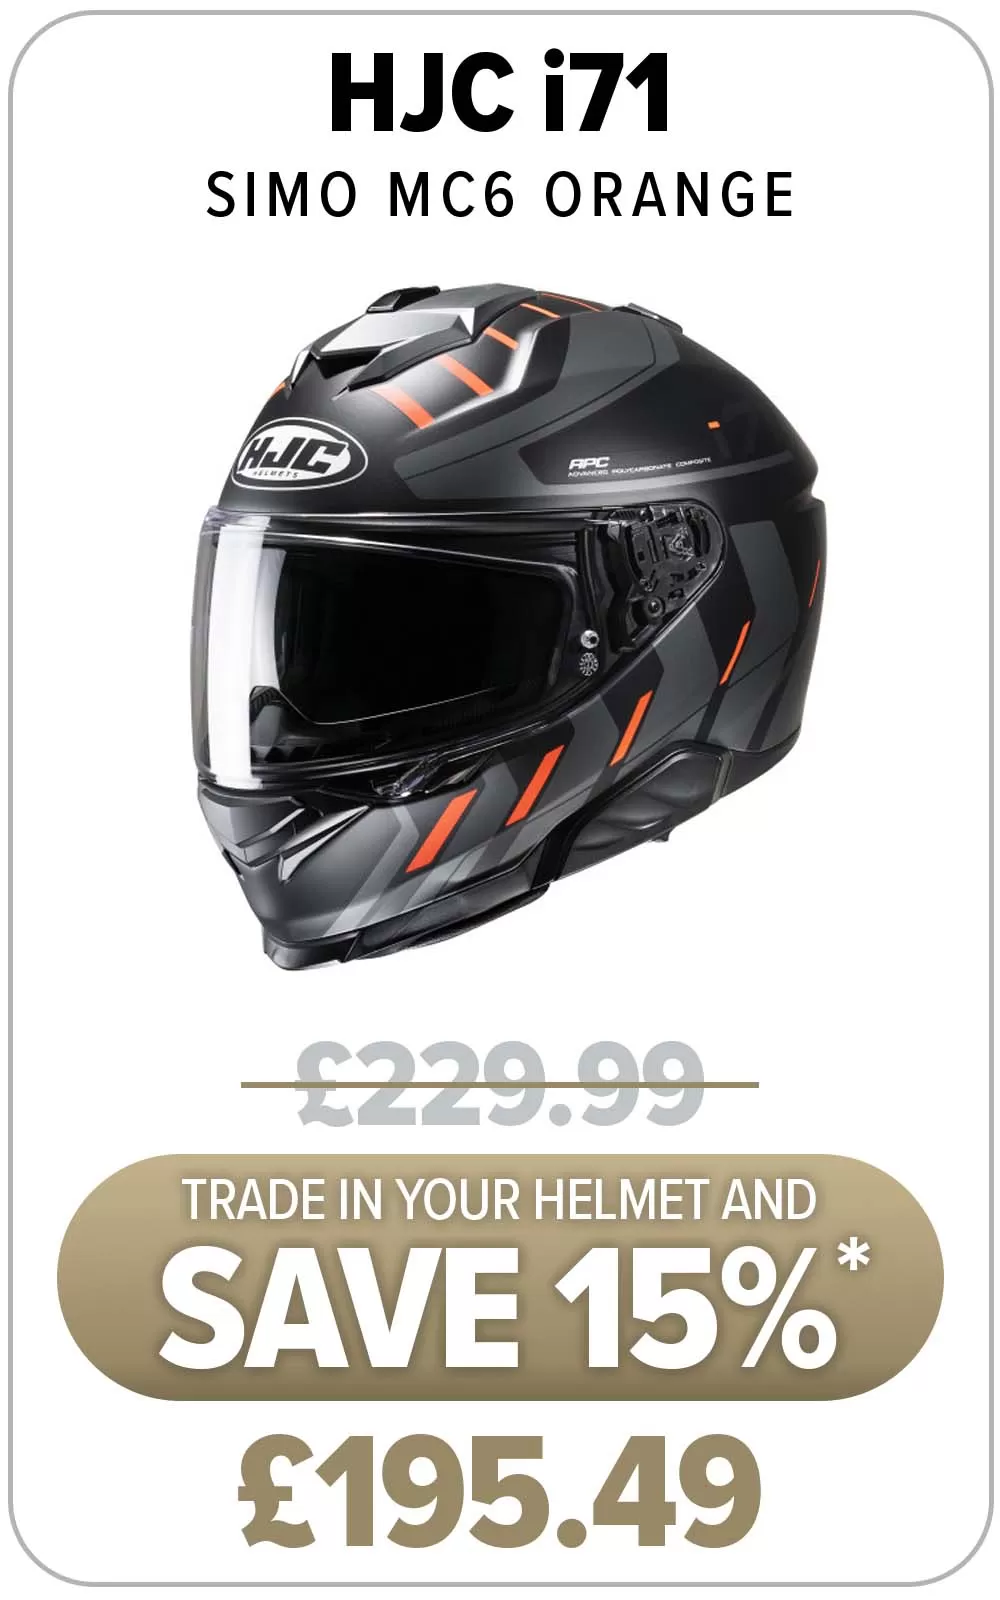 Enjoy up to 25% off a new helmet when you trade in your old one! T&Cs apply. Only at Laguna Motorcycles.